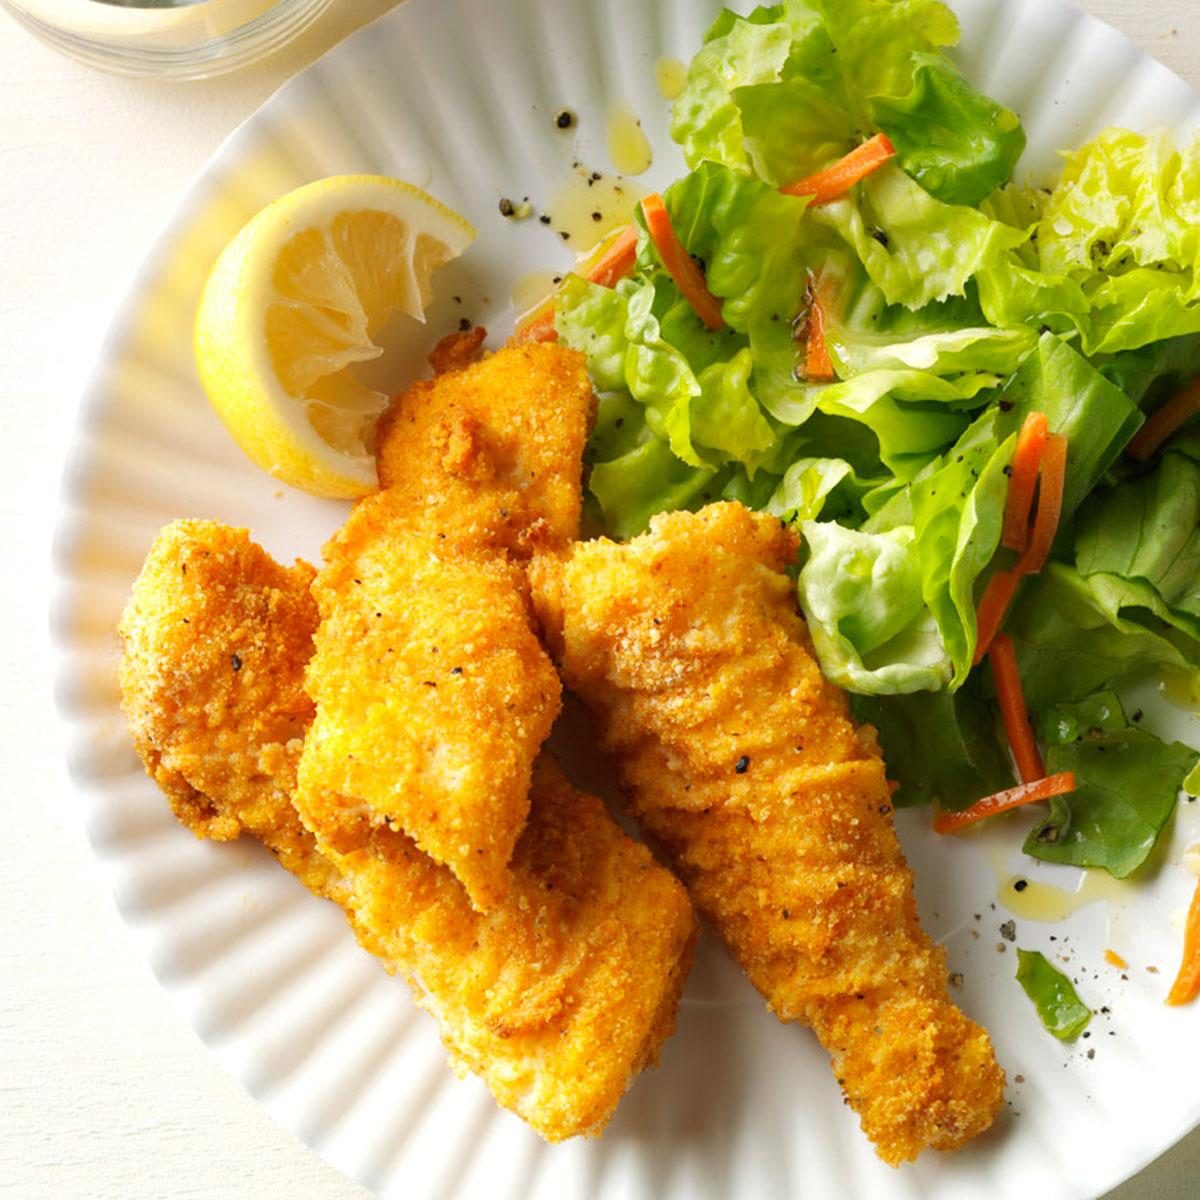 What seasonings go well in a fish batter recipe?